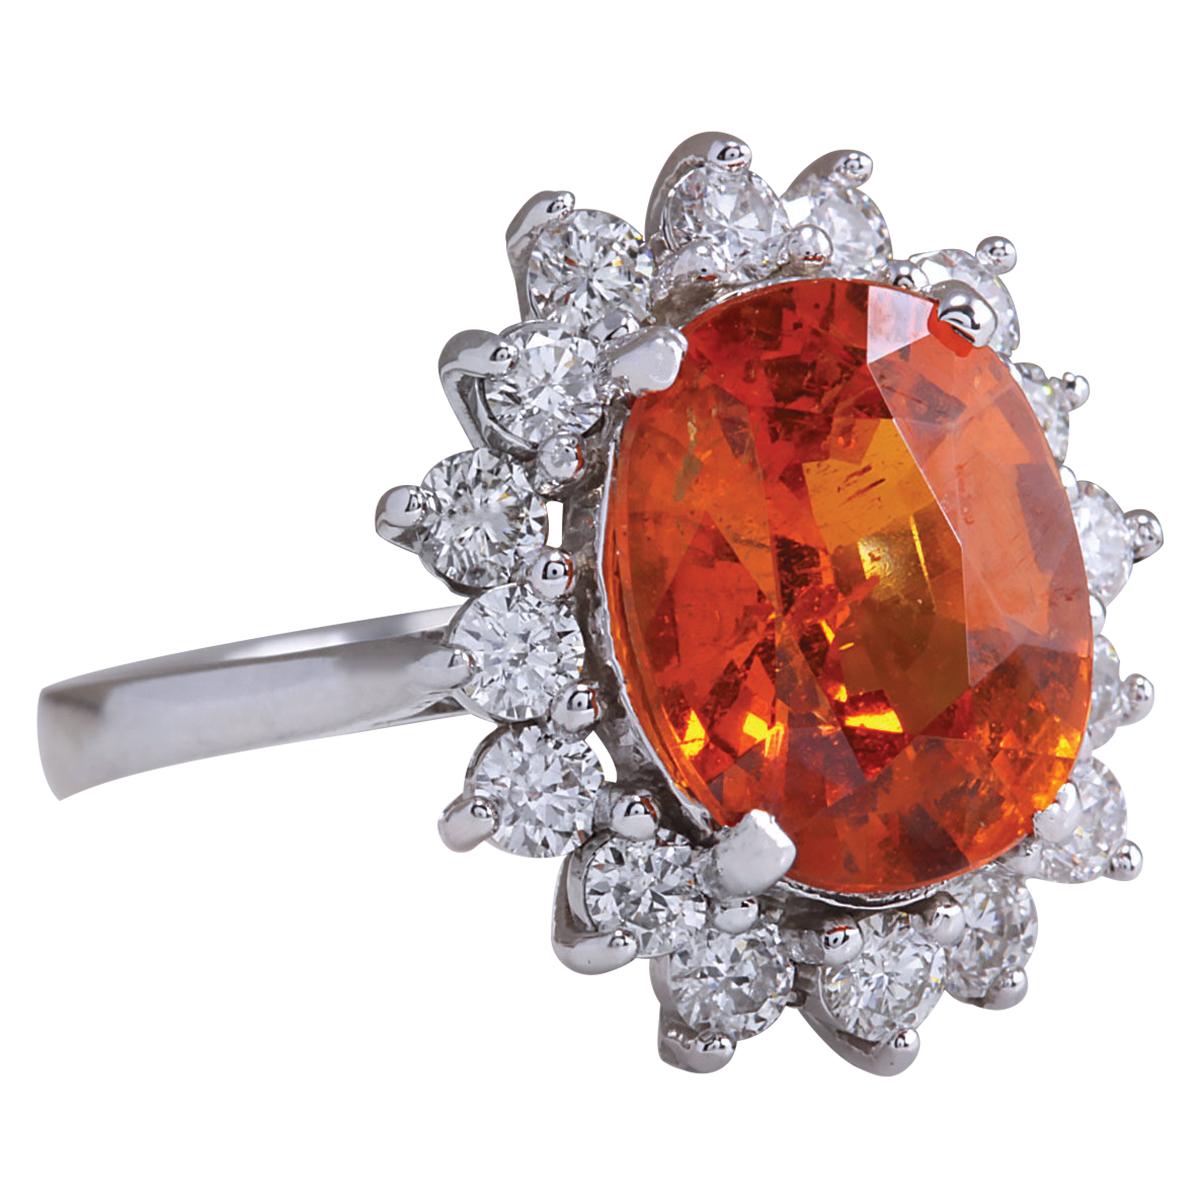 Stamped: 18K White Gold<br>Total Ring Weight: 4.8 Grams<br>Ring Length: N/A<br>Ring Width: N/A<br>Gemstone Weight: Total Natural Mandarin Garnet Weight is 5.01 Carat (Measures: 11.30x8.92 mm)<br>Color: Orange<br>Diamond Weight: Total Natural Diamond